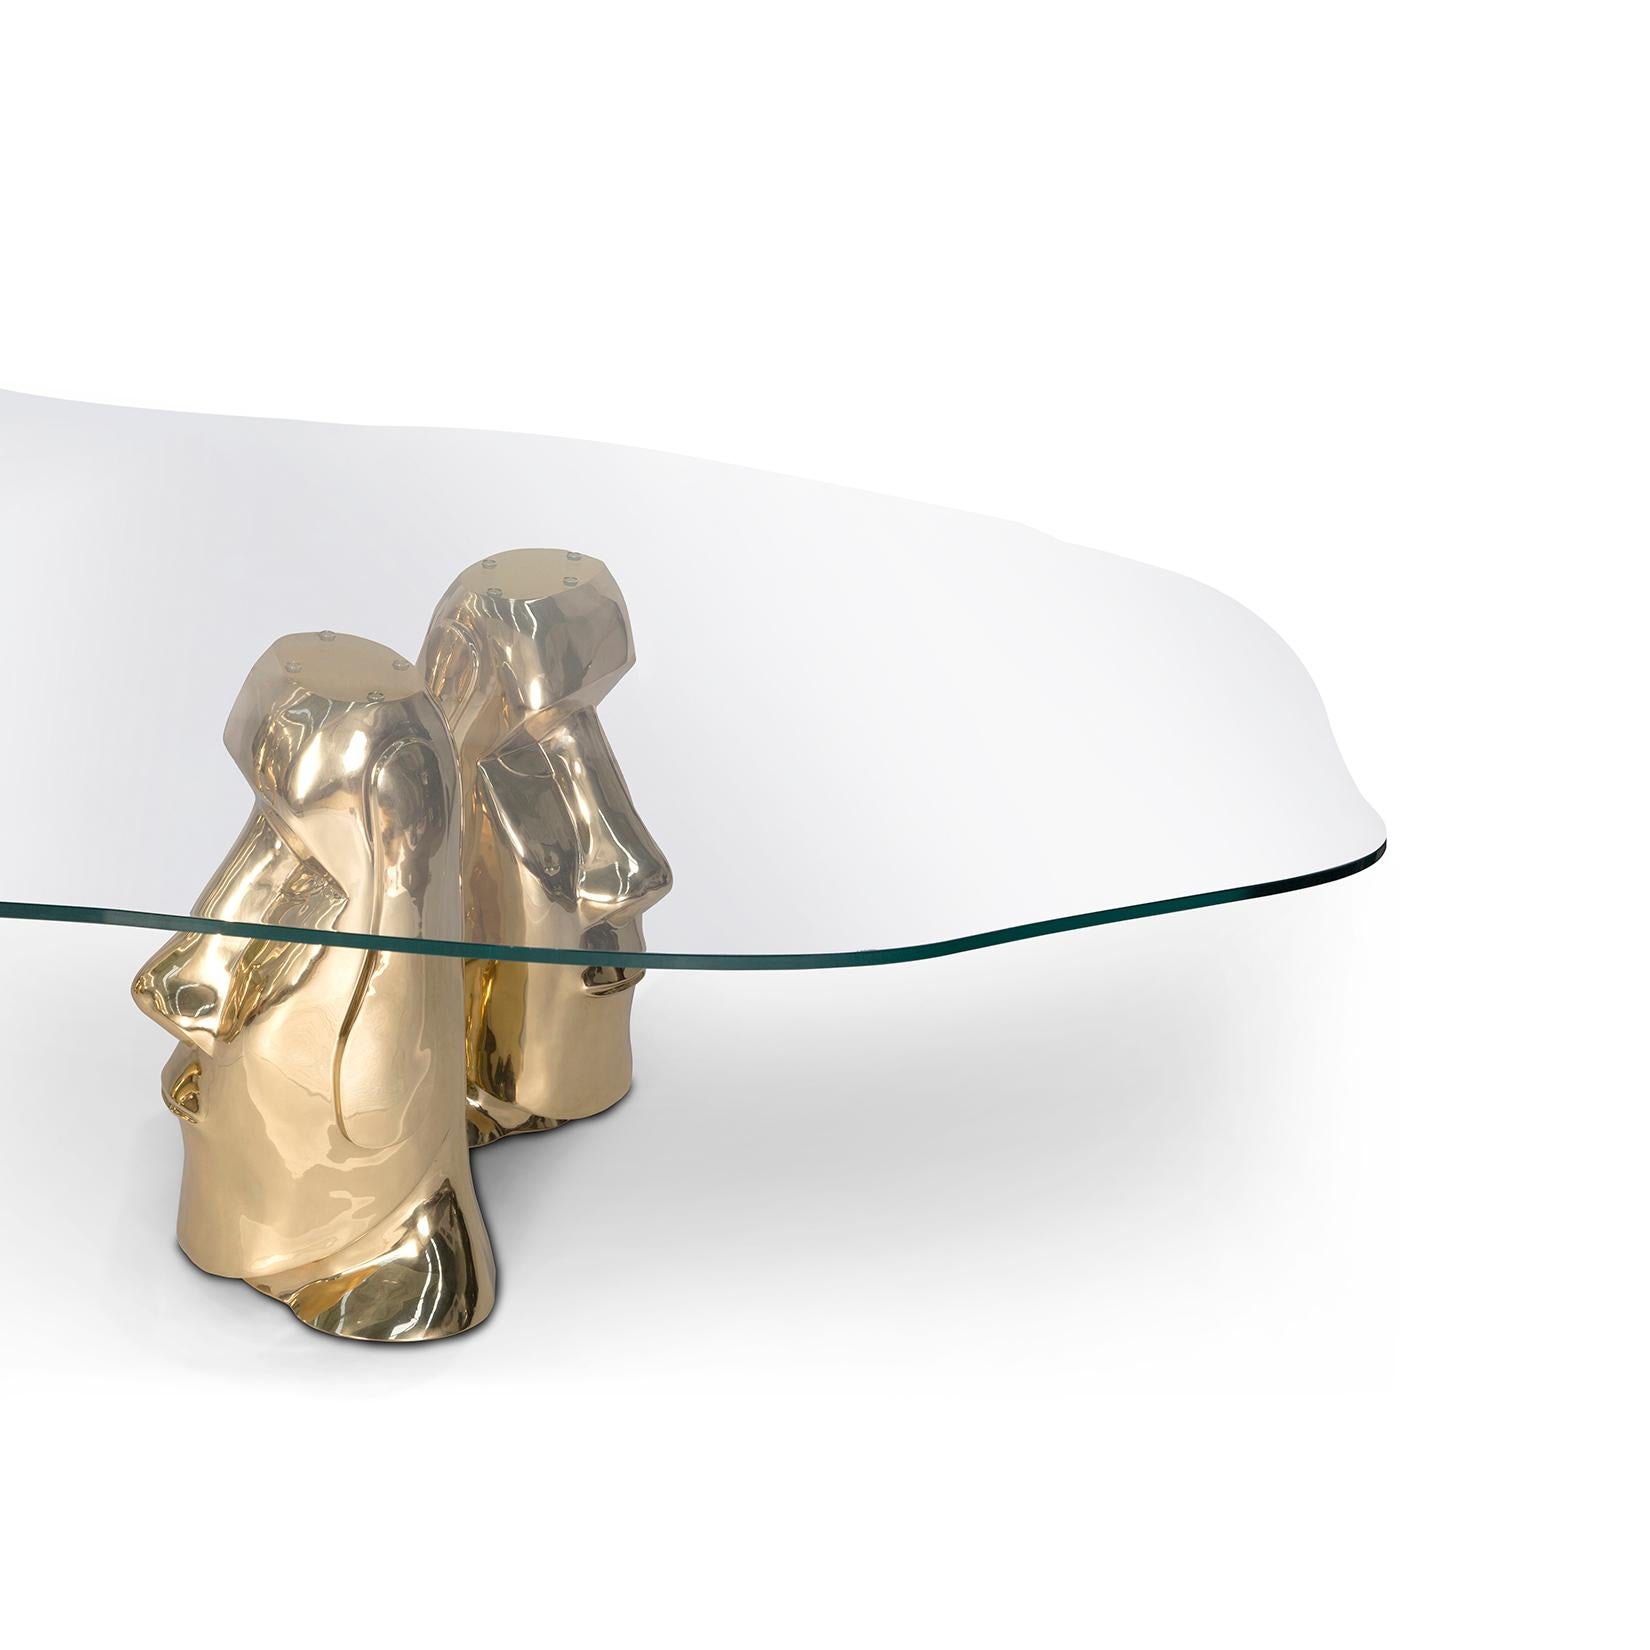 Modern Contemporary Moai Dining Table in Polished Brass Cast and Glass Tabletop For Sale